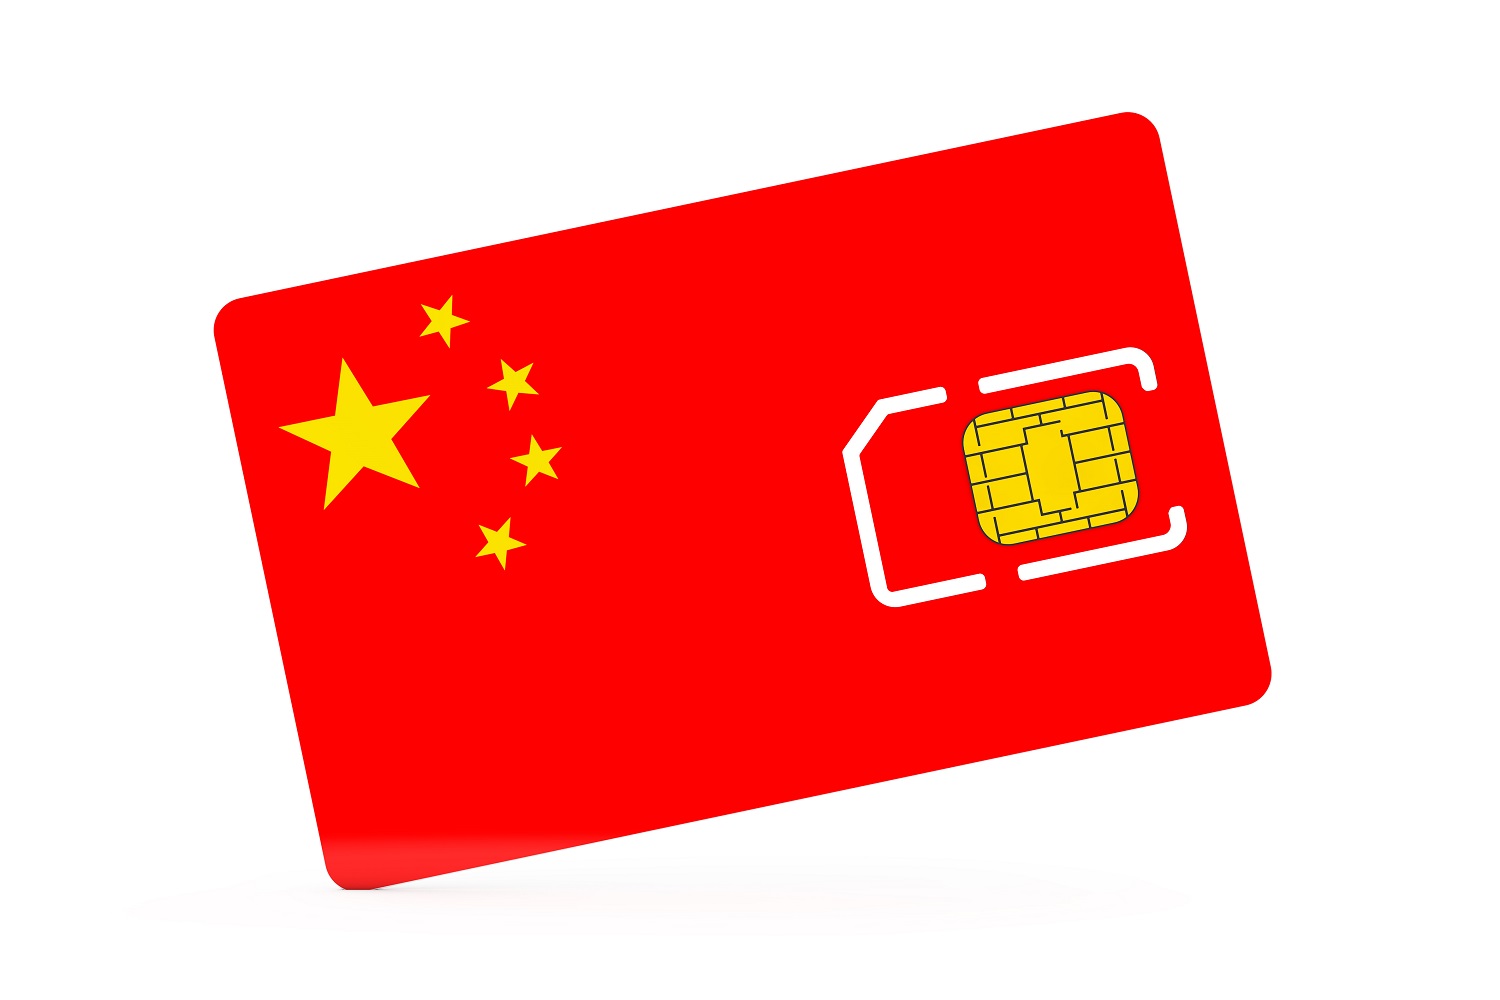 Chinese “Super SIM” Cards to Feature New Digital Yuan Functions